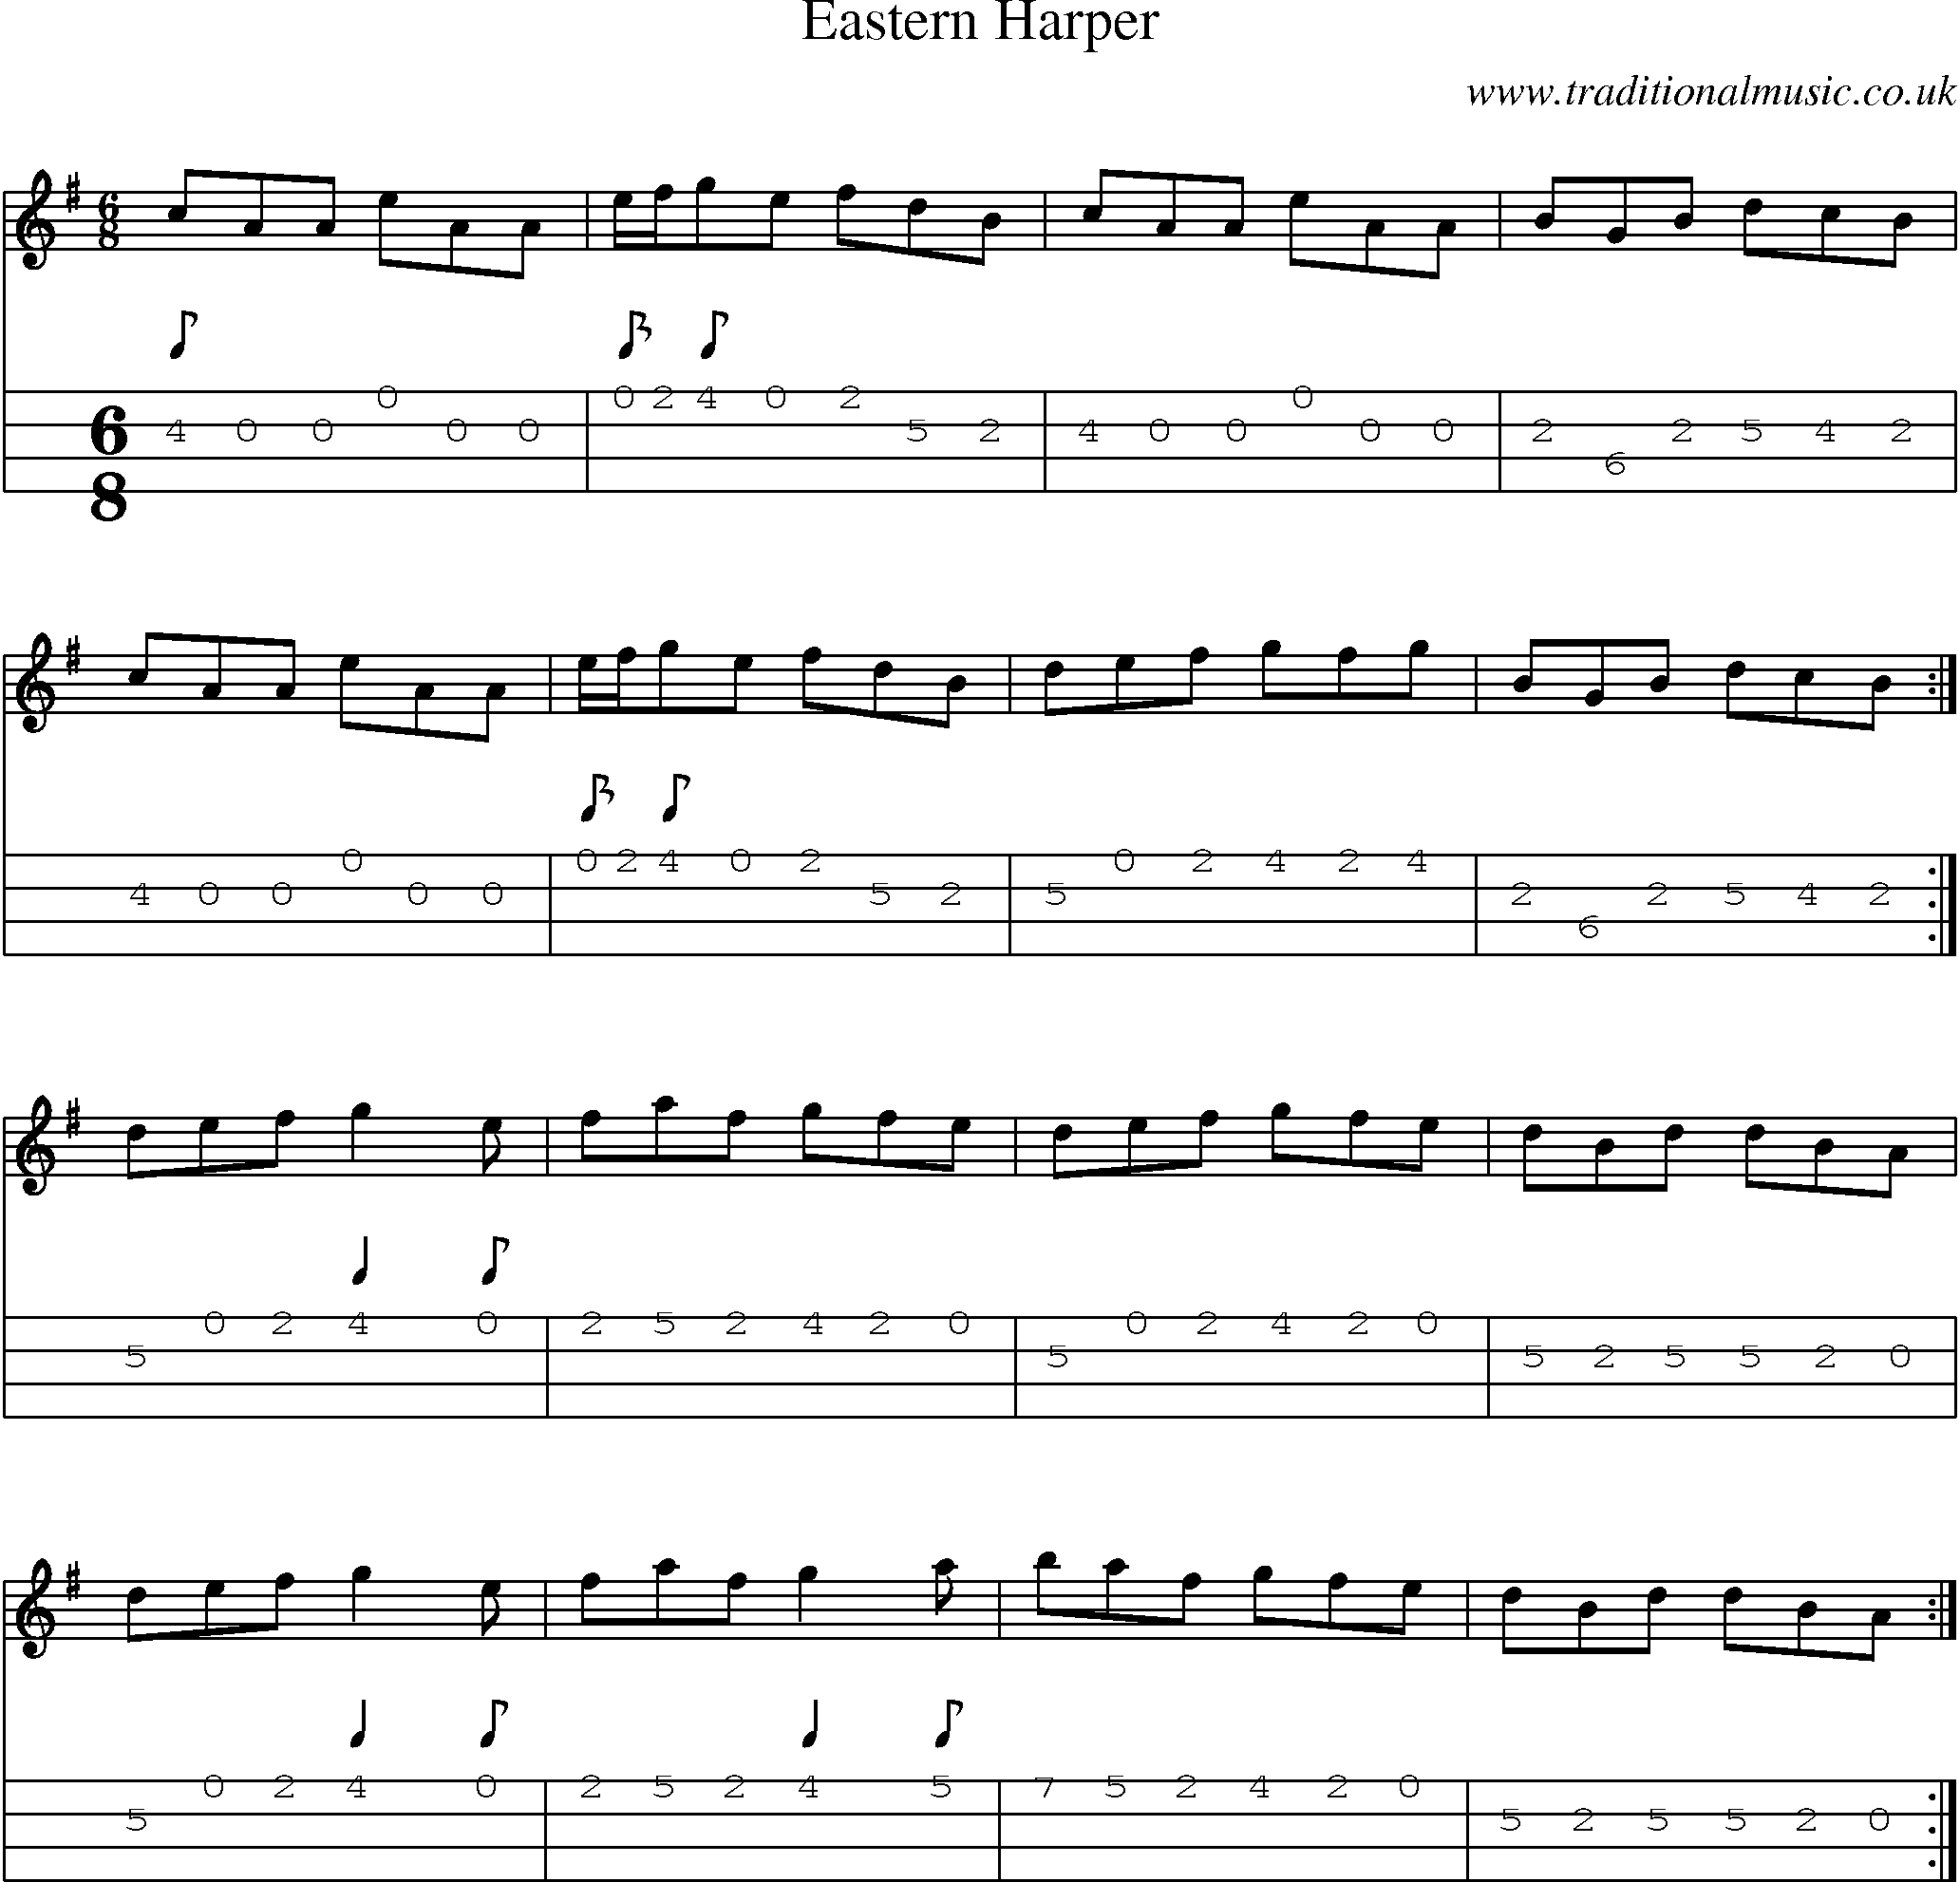 Music Score and Mandolin Tabs for Eastern Harper